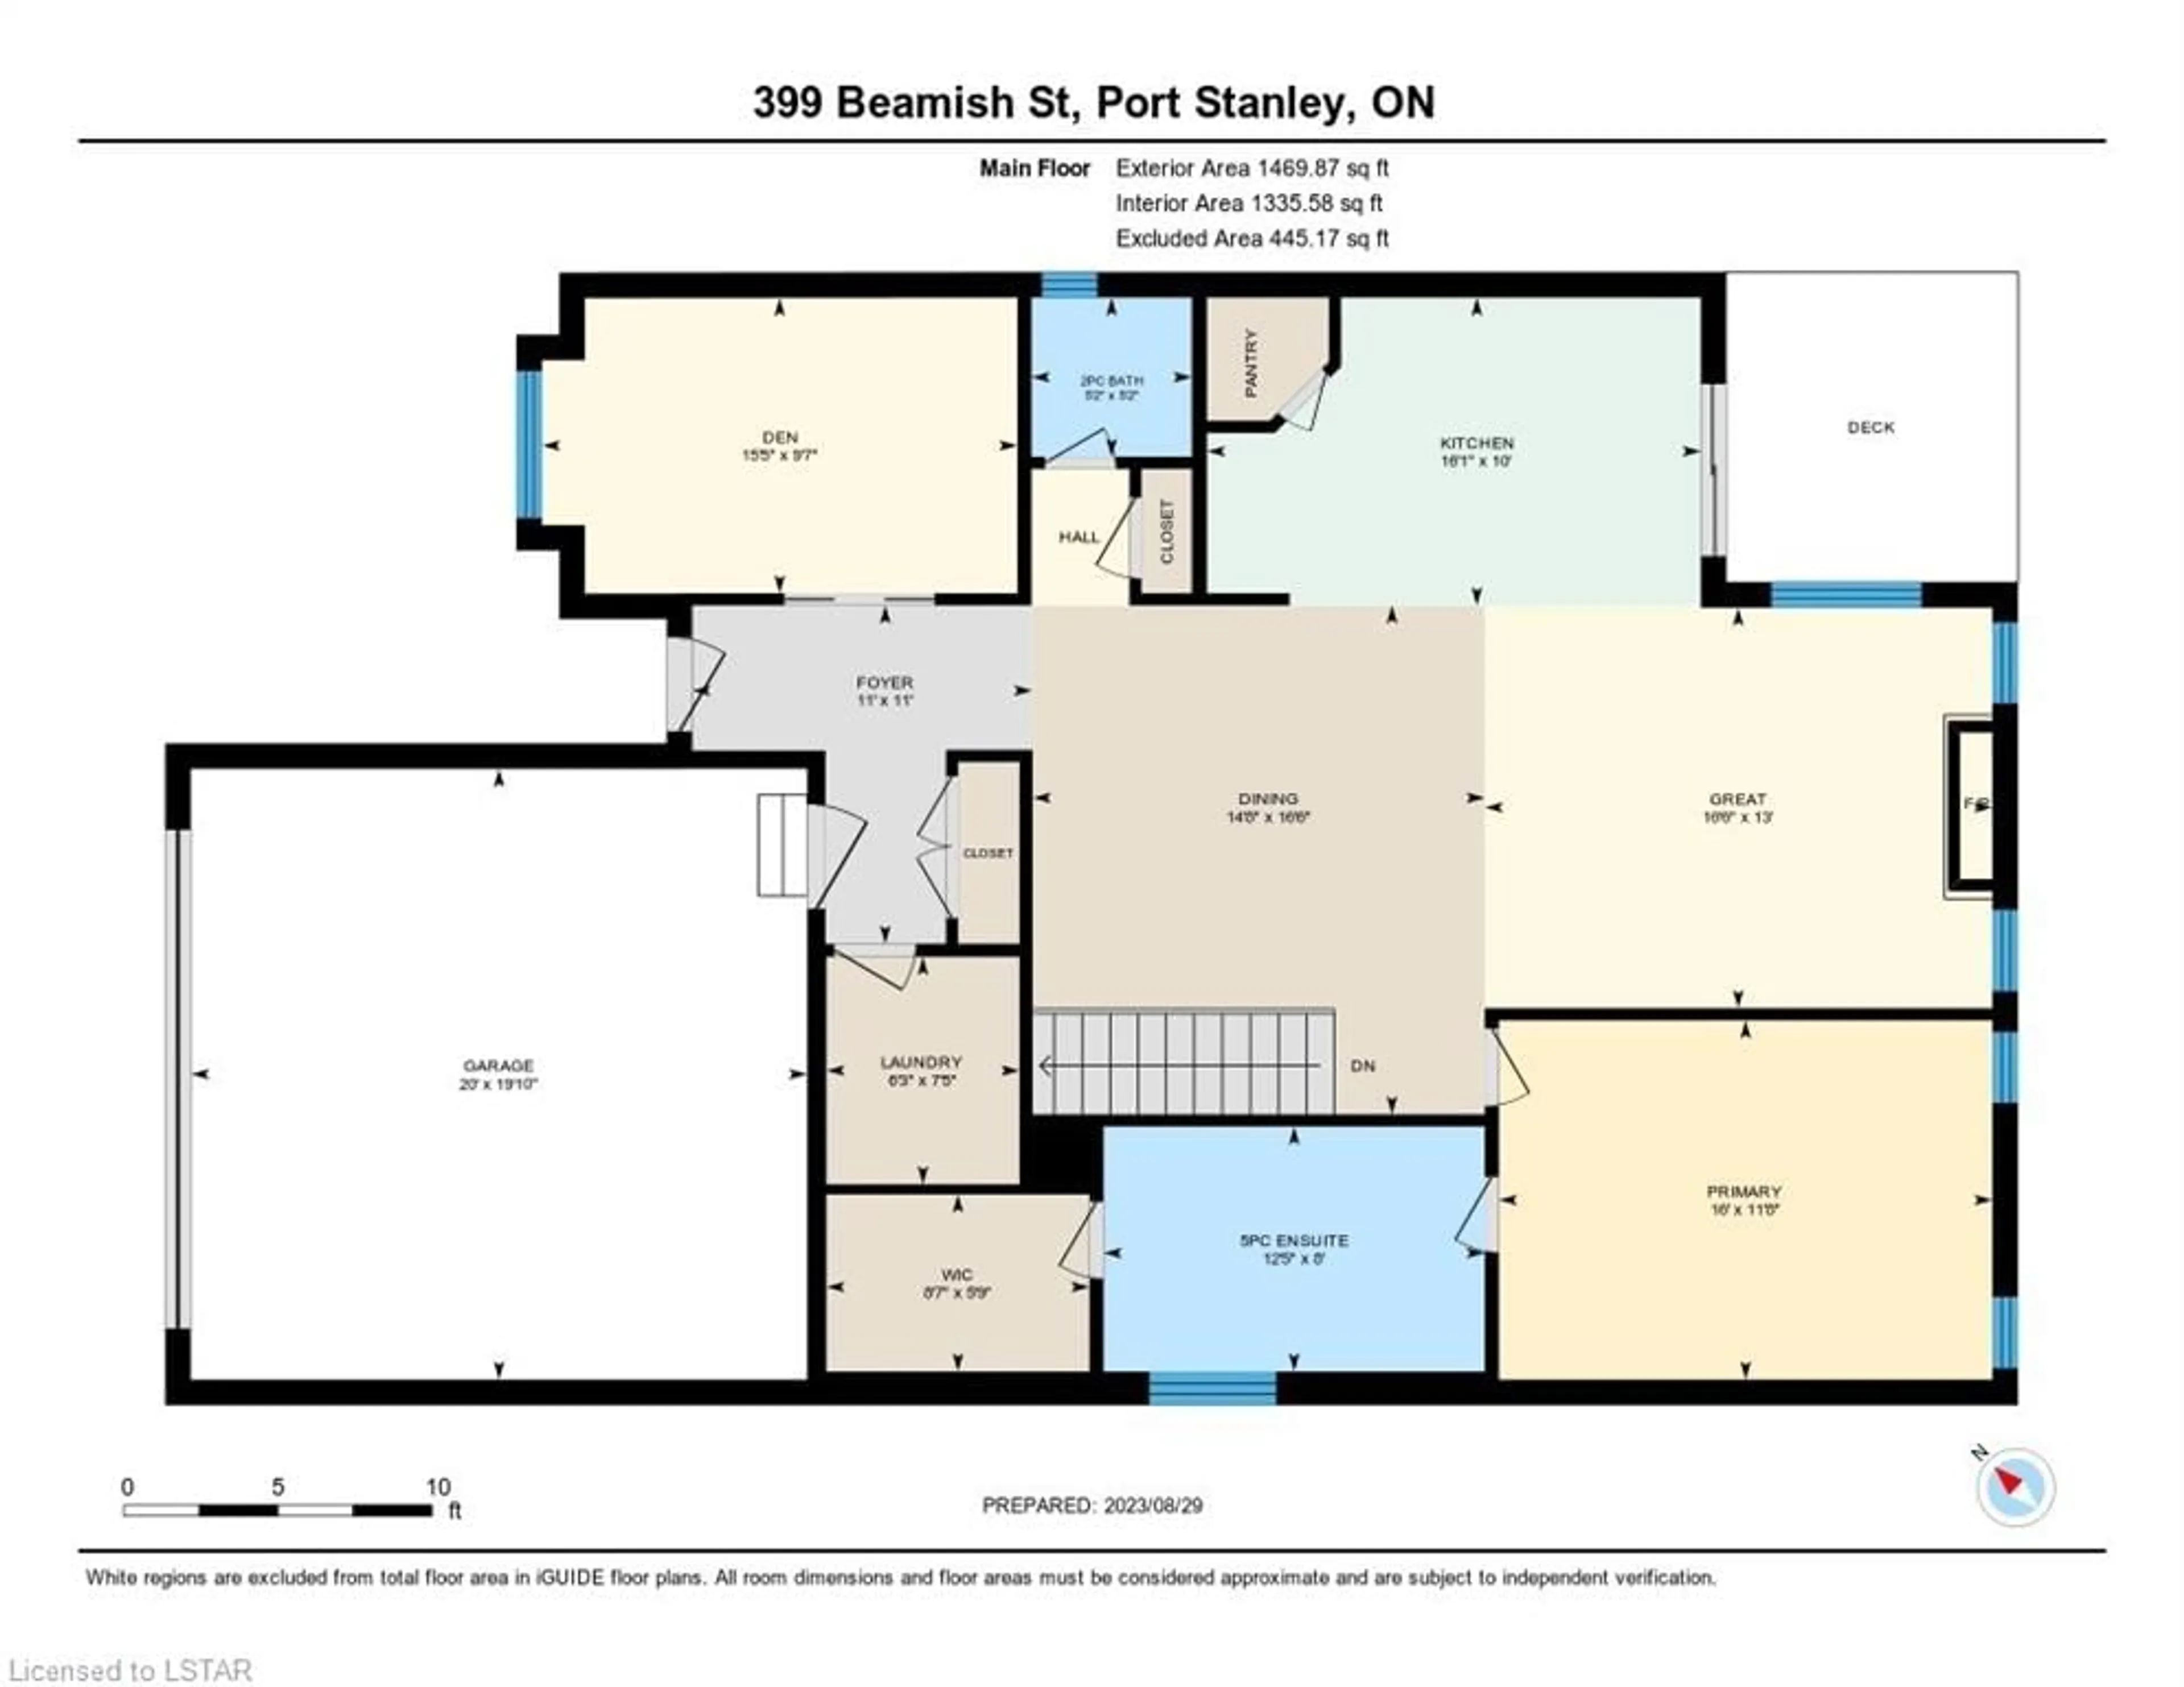 Floor plan for 399 Beamish St, Port Stanley Ontario N5L 0A7